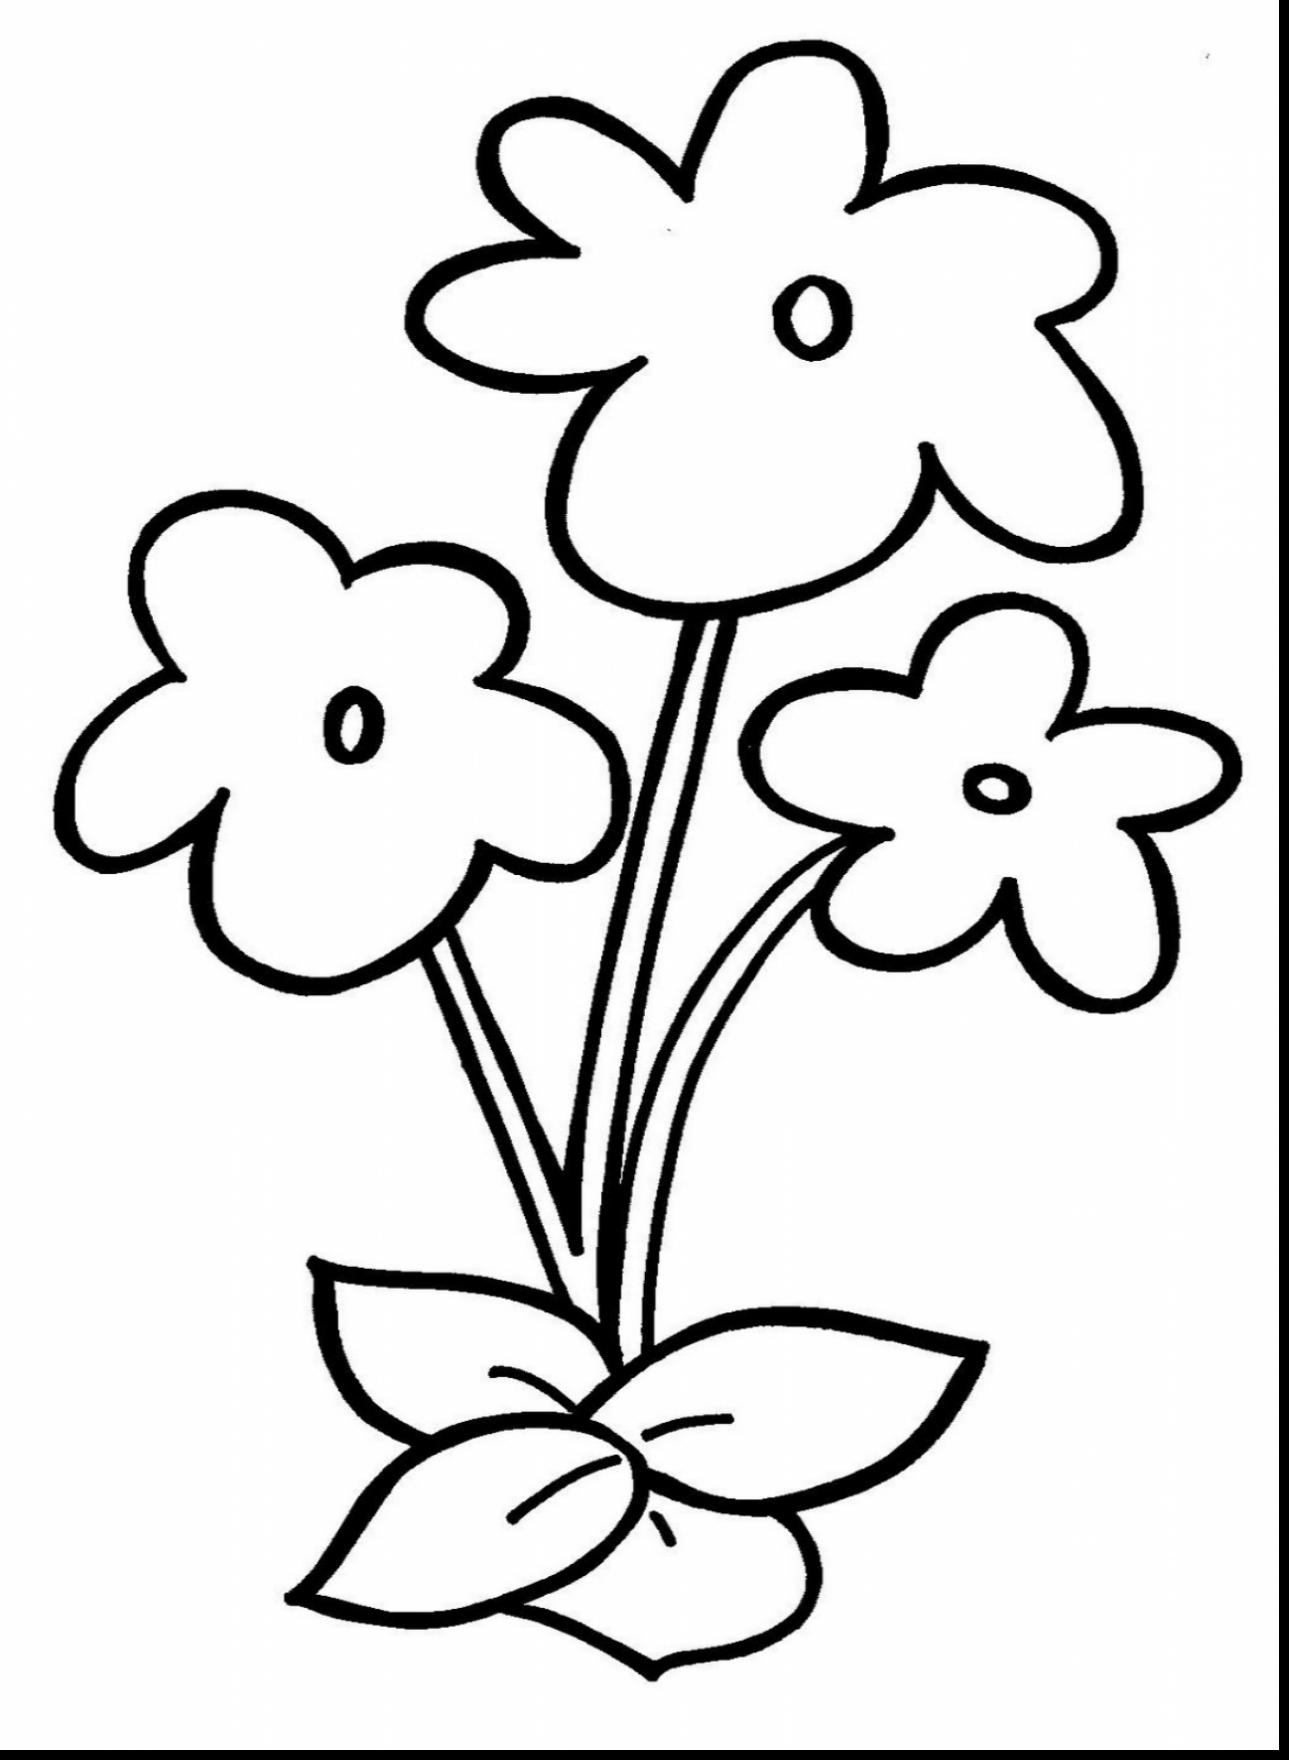 coloring-pages-for-seniors-at-getcolorings-free-printable-colorings-pages-to-print-and-color